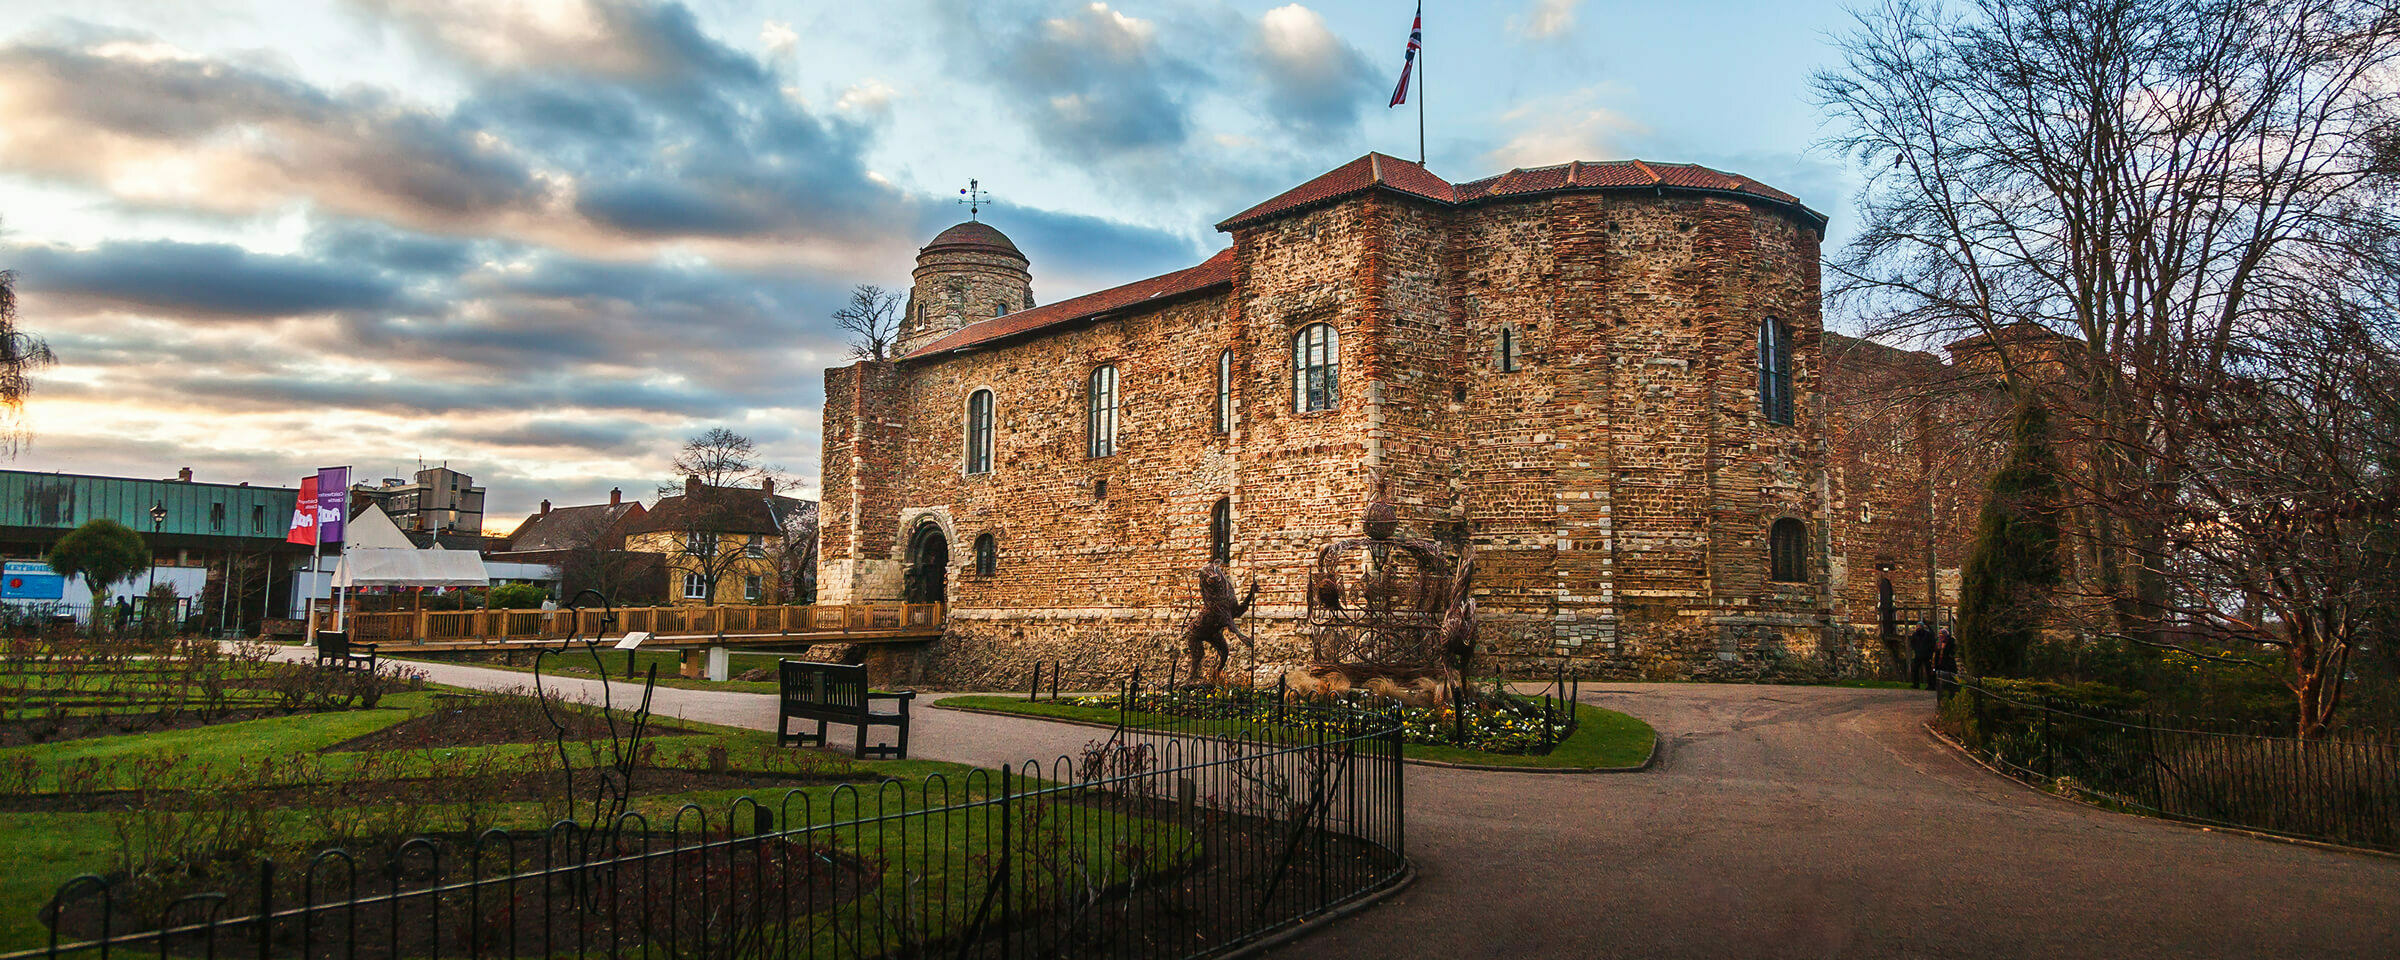 Colchester castle - buy new build homes in Colchester, Essex